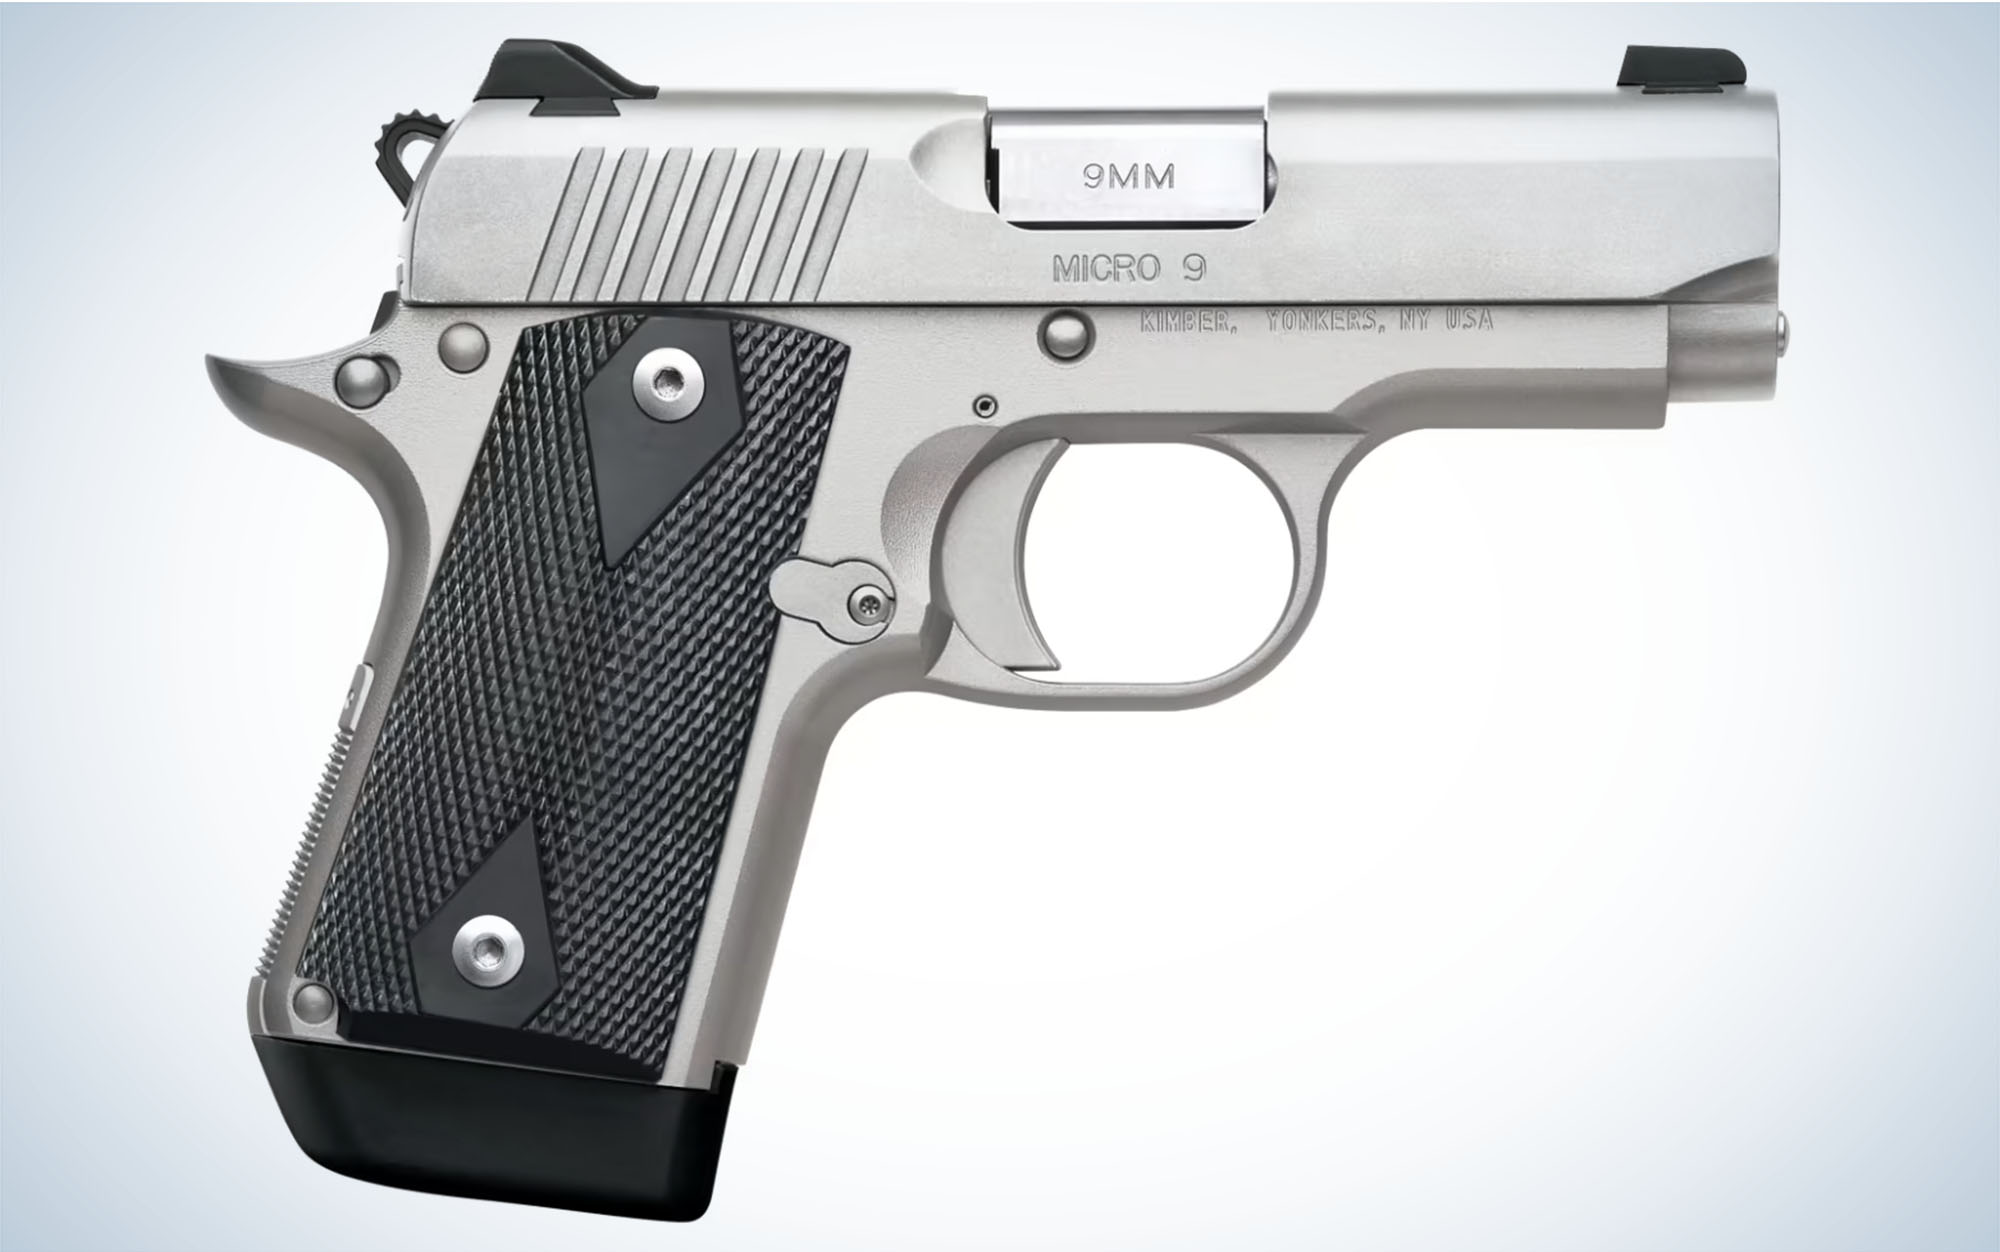 The Kimber Micro 9 is one of the best pocket pistols.